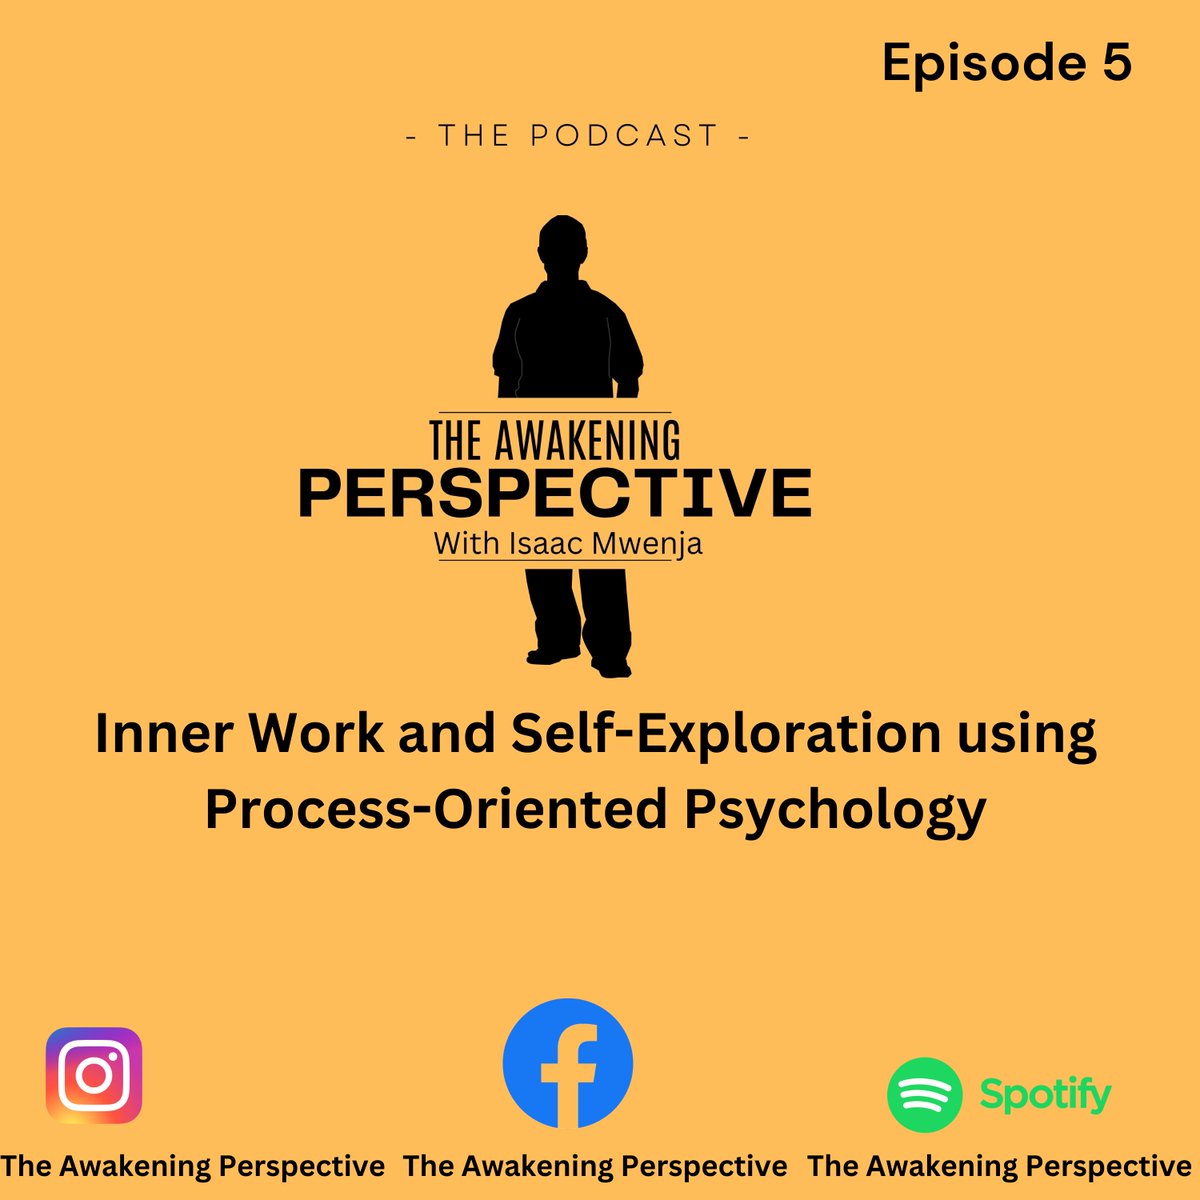 Tune in tomorrow on your favorite podcast platform, and let's explore the boundless potential of self-awareness and personal growth together. 🚀✨
Stay tuned, and mark your calendars for tomorrow's release! #InnerWorkAwakening #ProcessOrientedPsychology #SelfExploration